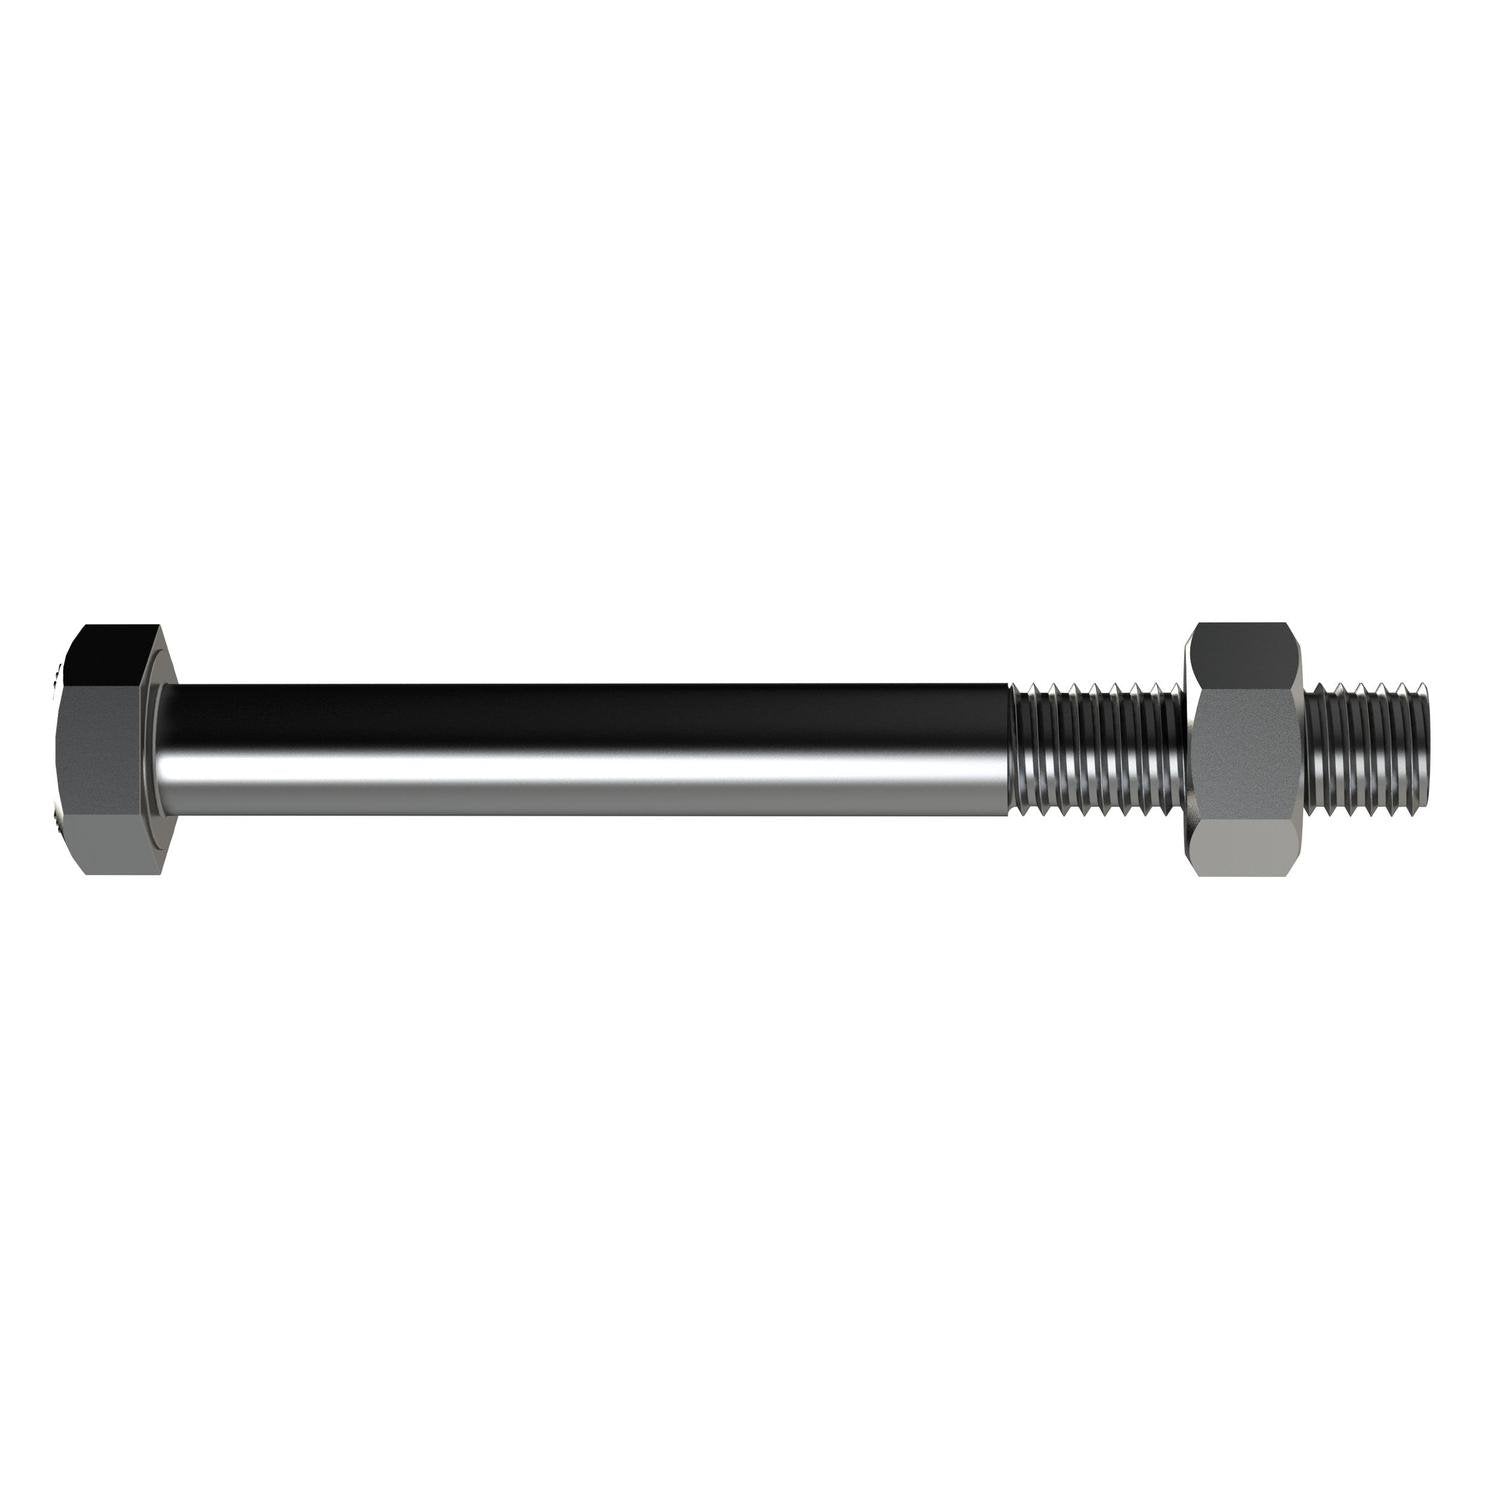 Bremick Engineer Bolt & Nut M16 X 130Mm Stainless Steel